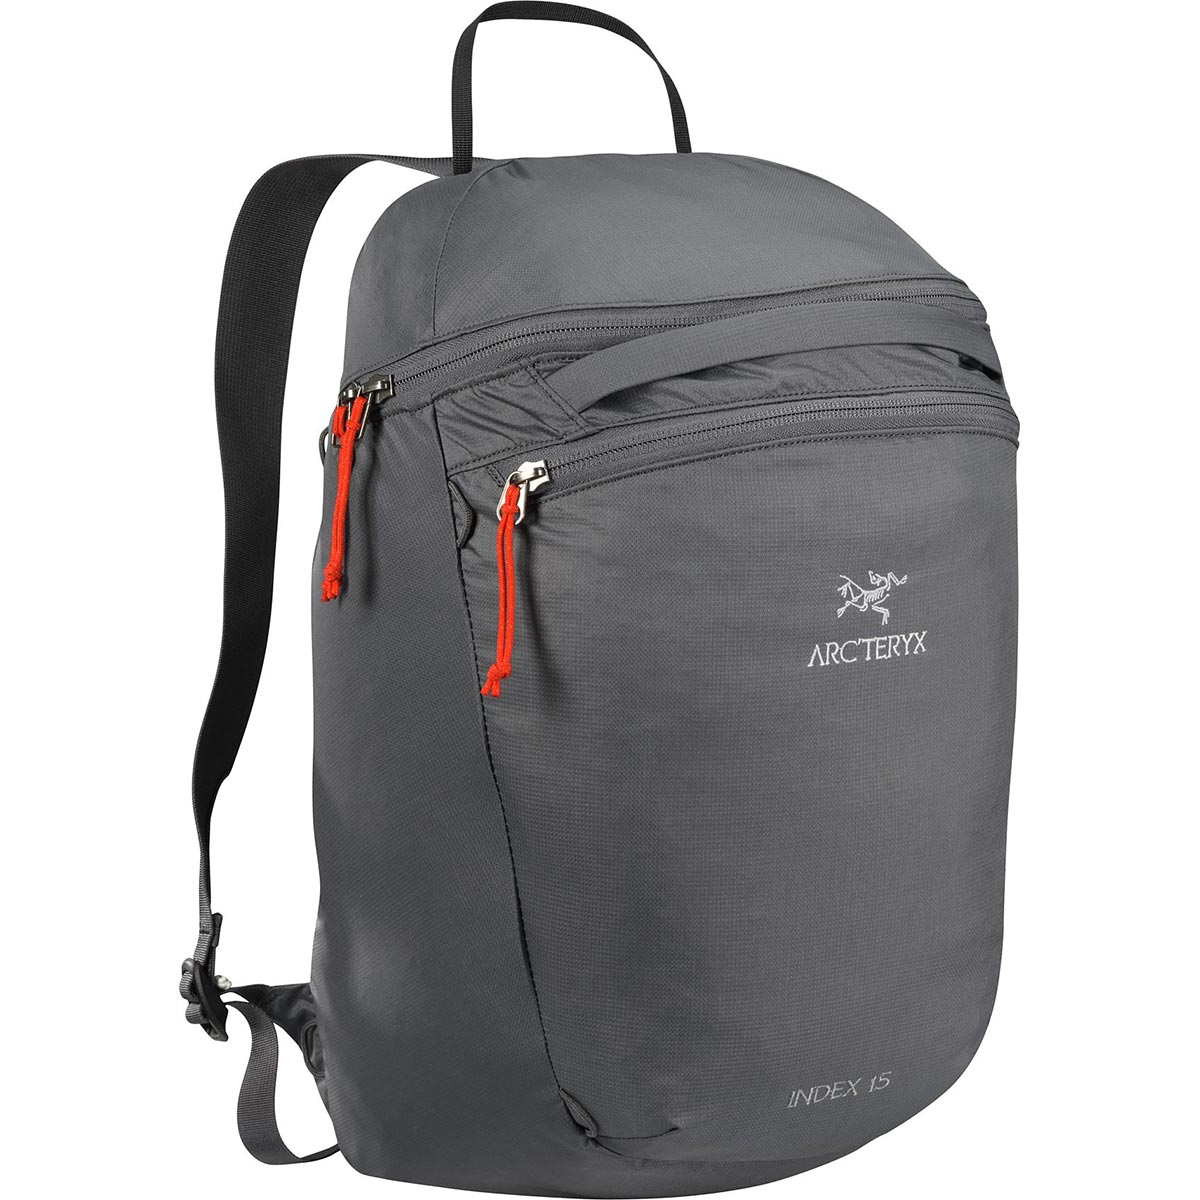 Index 15 Backpack, discontinued colors